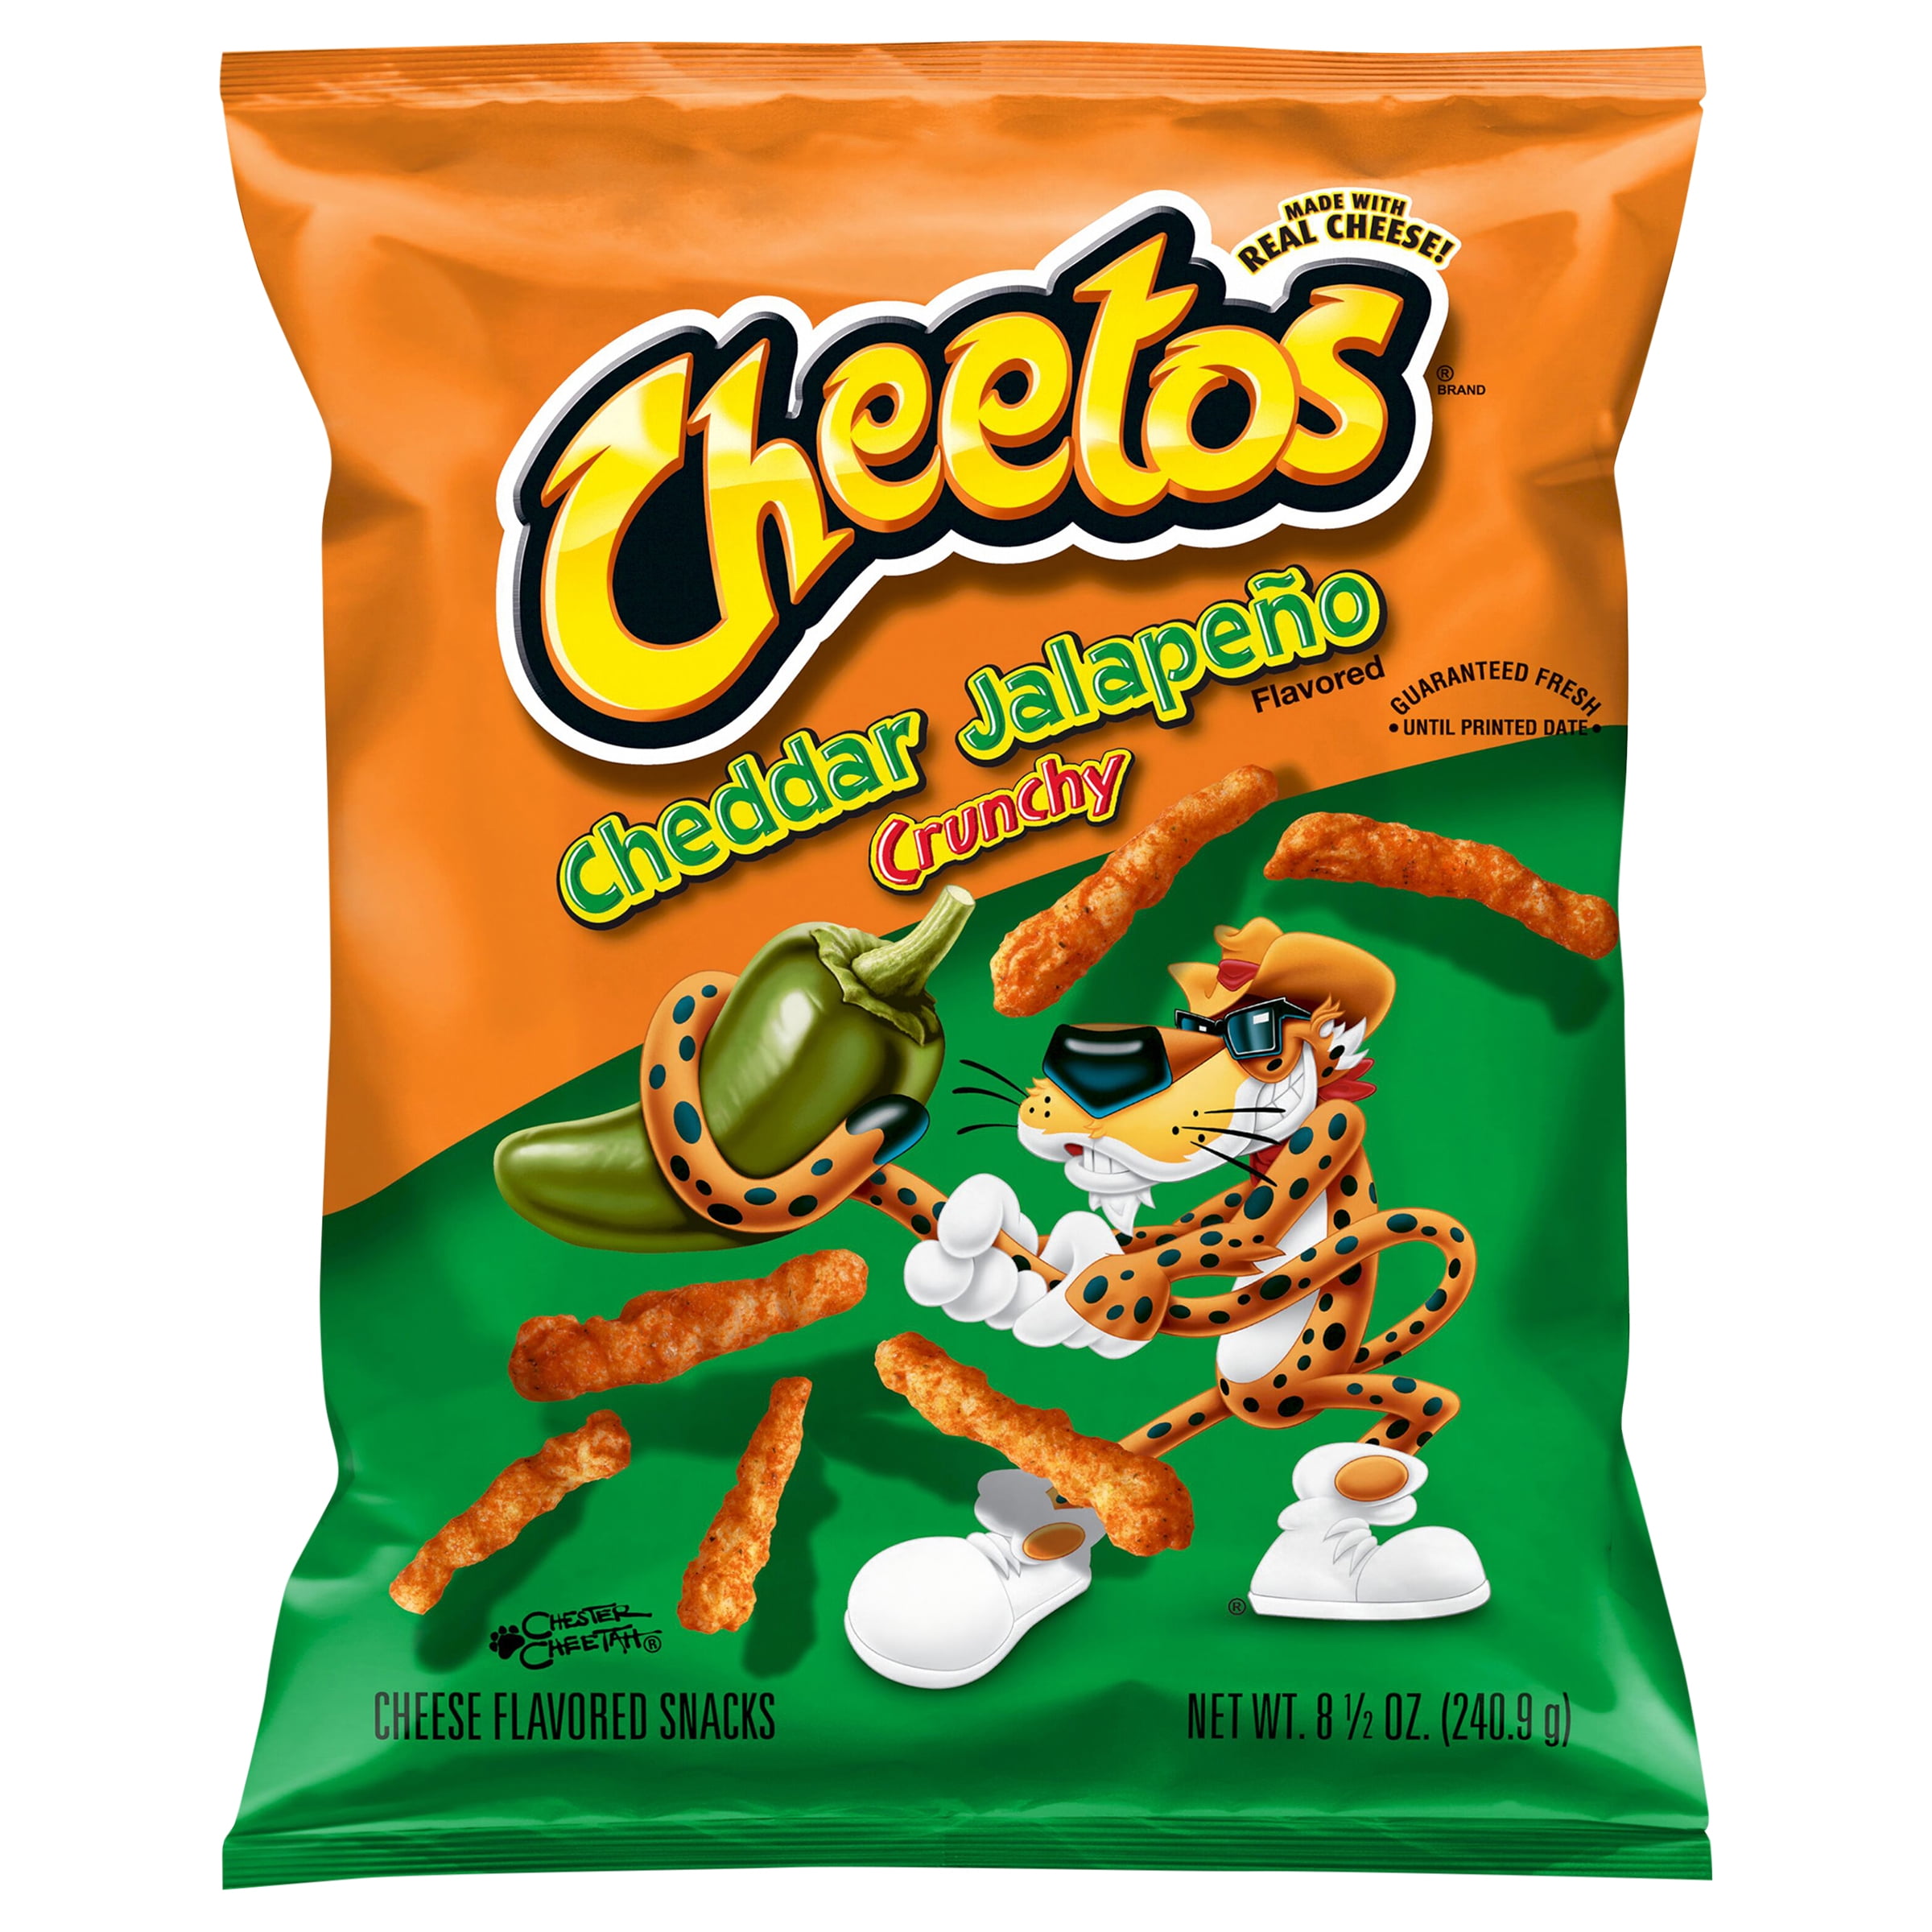 6 bags of Cheetos Crunchy Flamin' Hot Cheese Flavored Snack Chips 285g Each